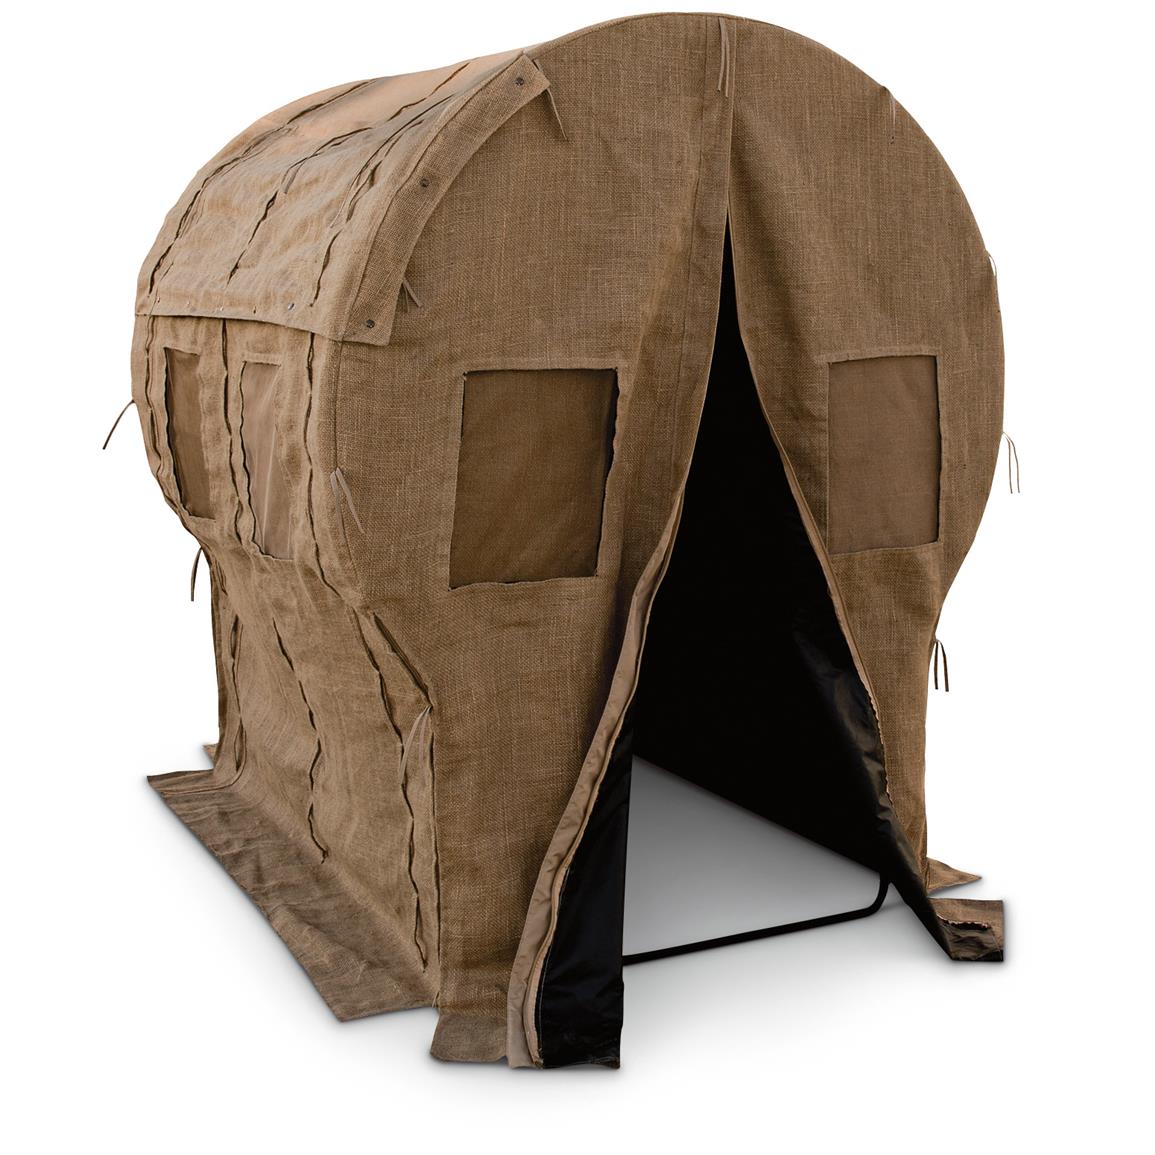 Muddy The Bale Ground Blind 668016, Ground Blinds at Sportsman's Guide